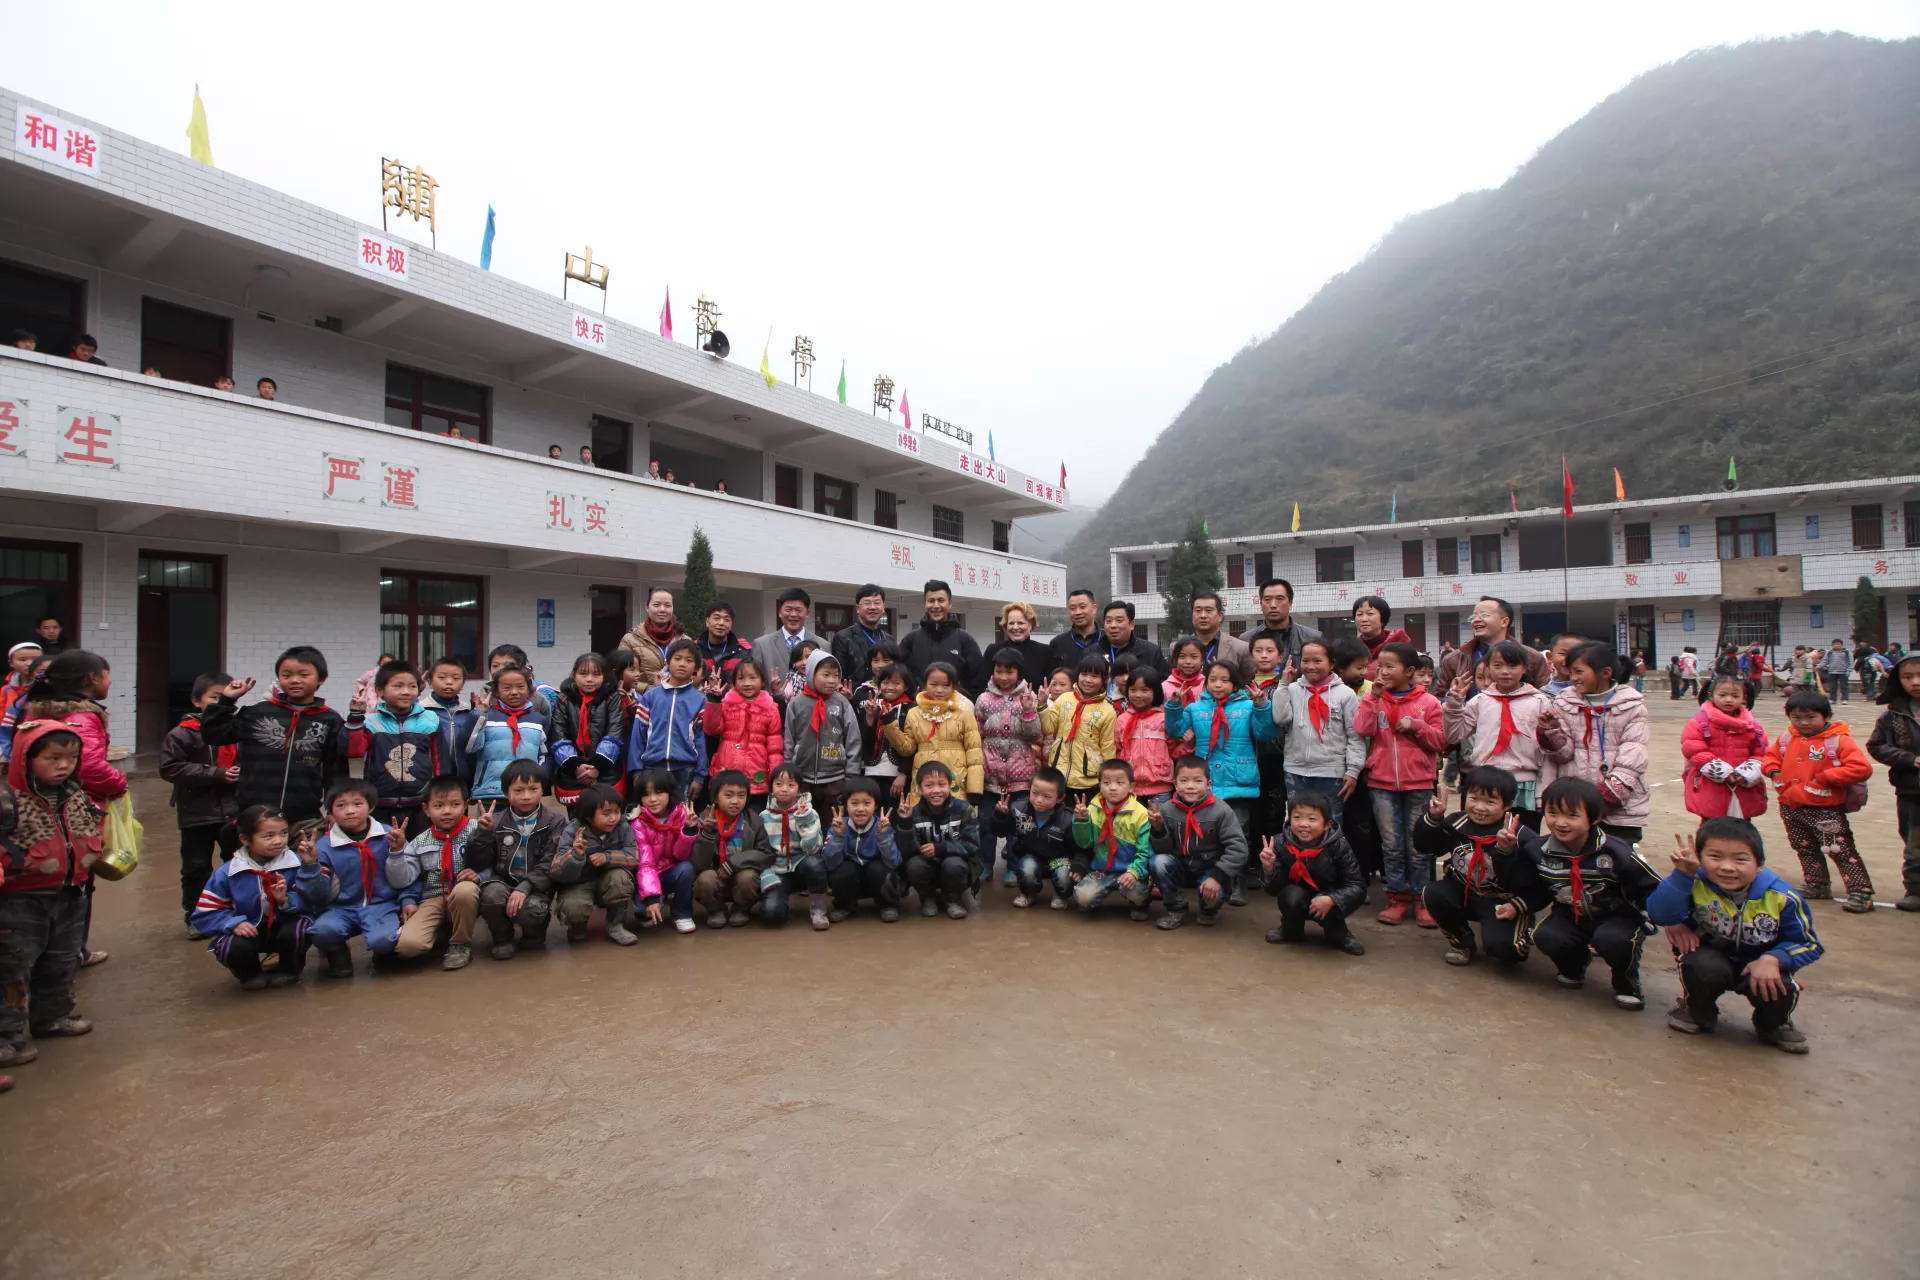 Chen Kun is having a group photo with students and teachers in Xinzhai primary school in Zhuchang Village.